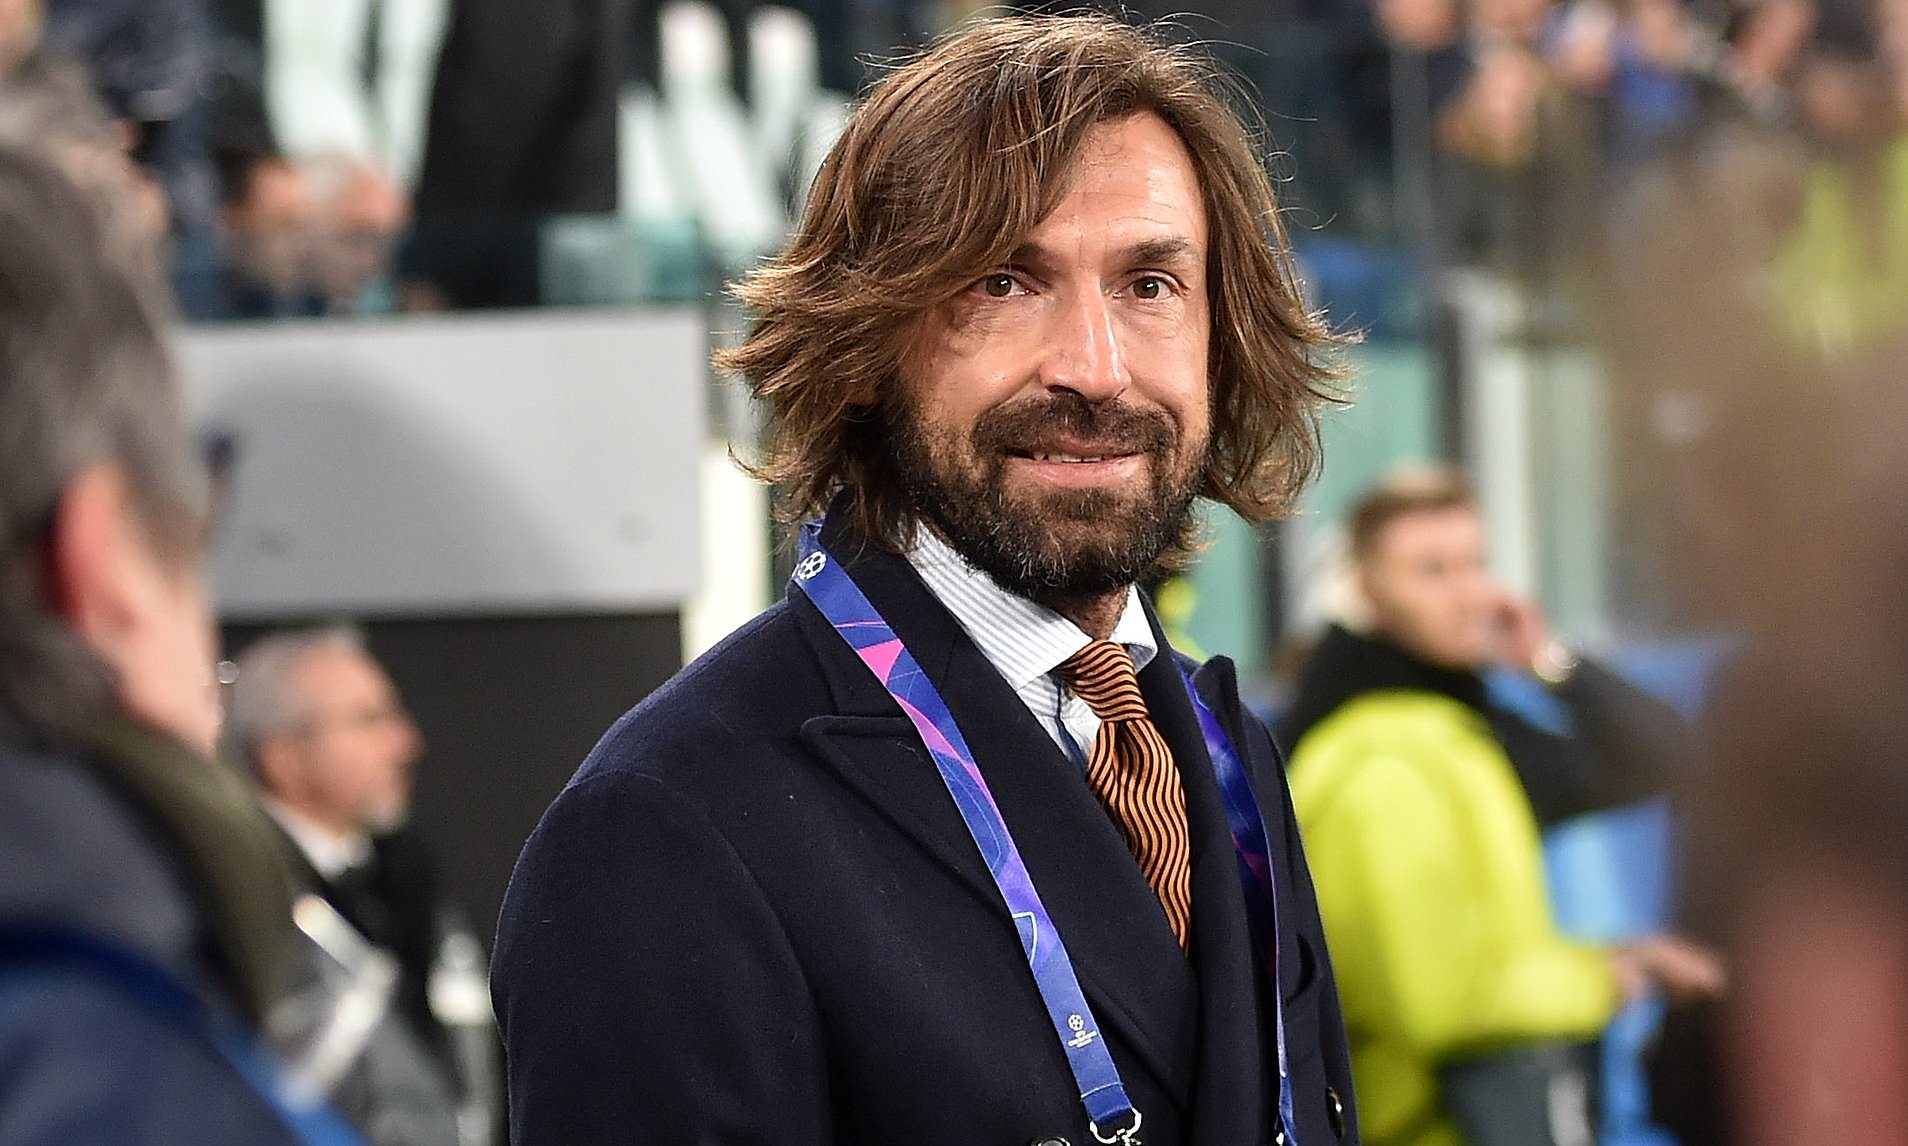 Andrea Pirlo named as New Juventus manager on a two year deal after Maurizio Sarri's sacking | Juventus